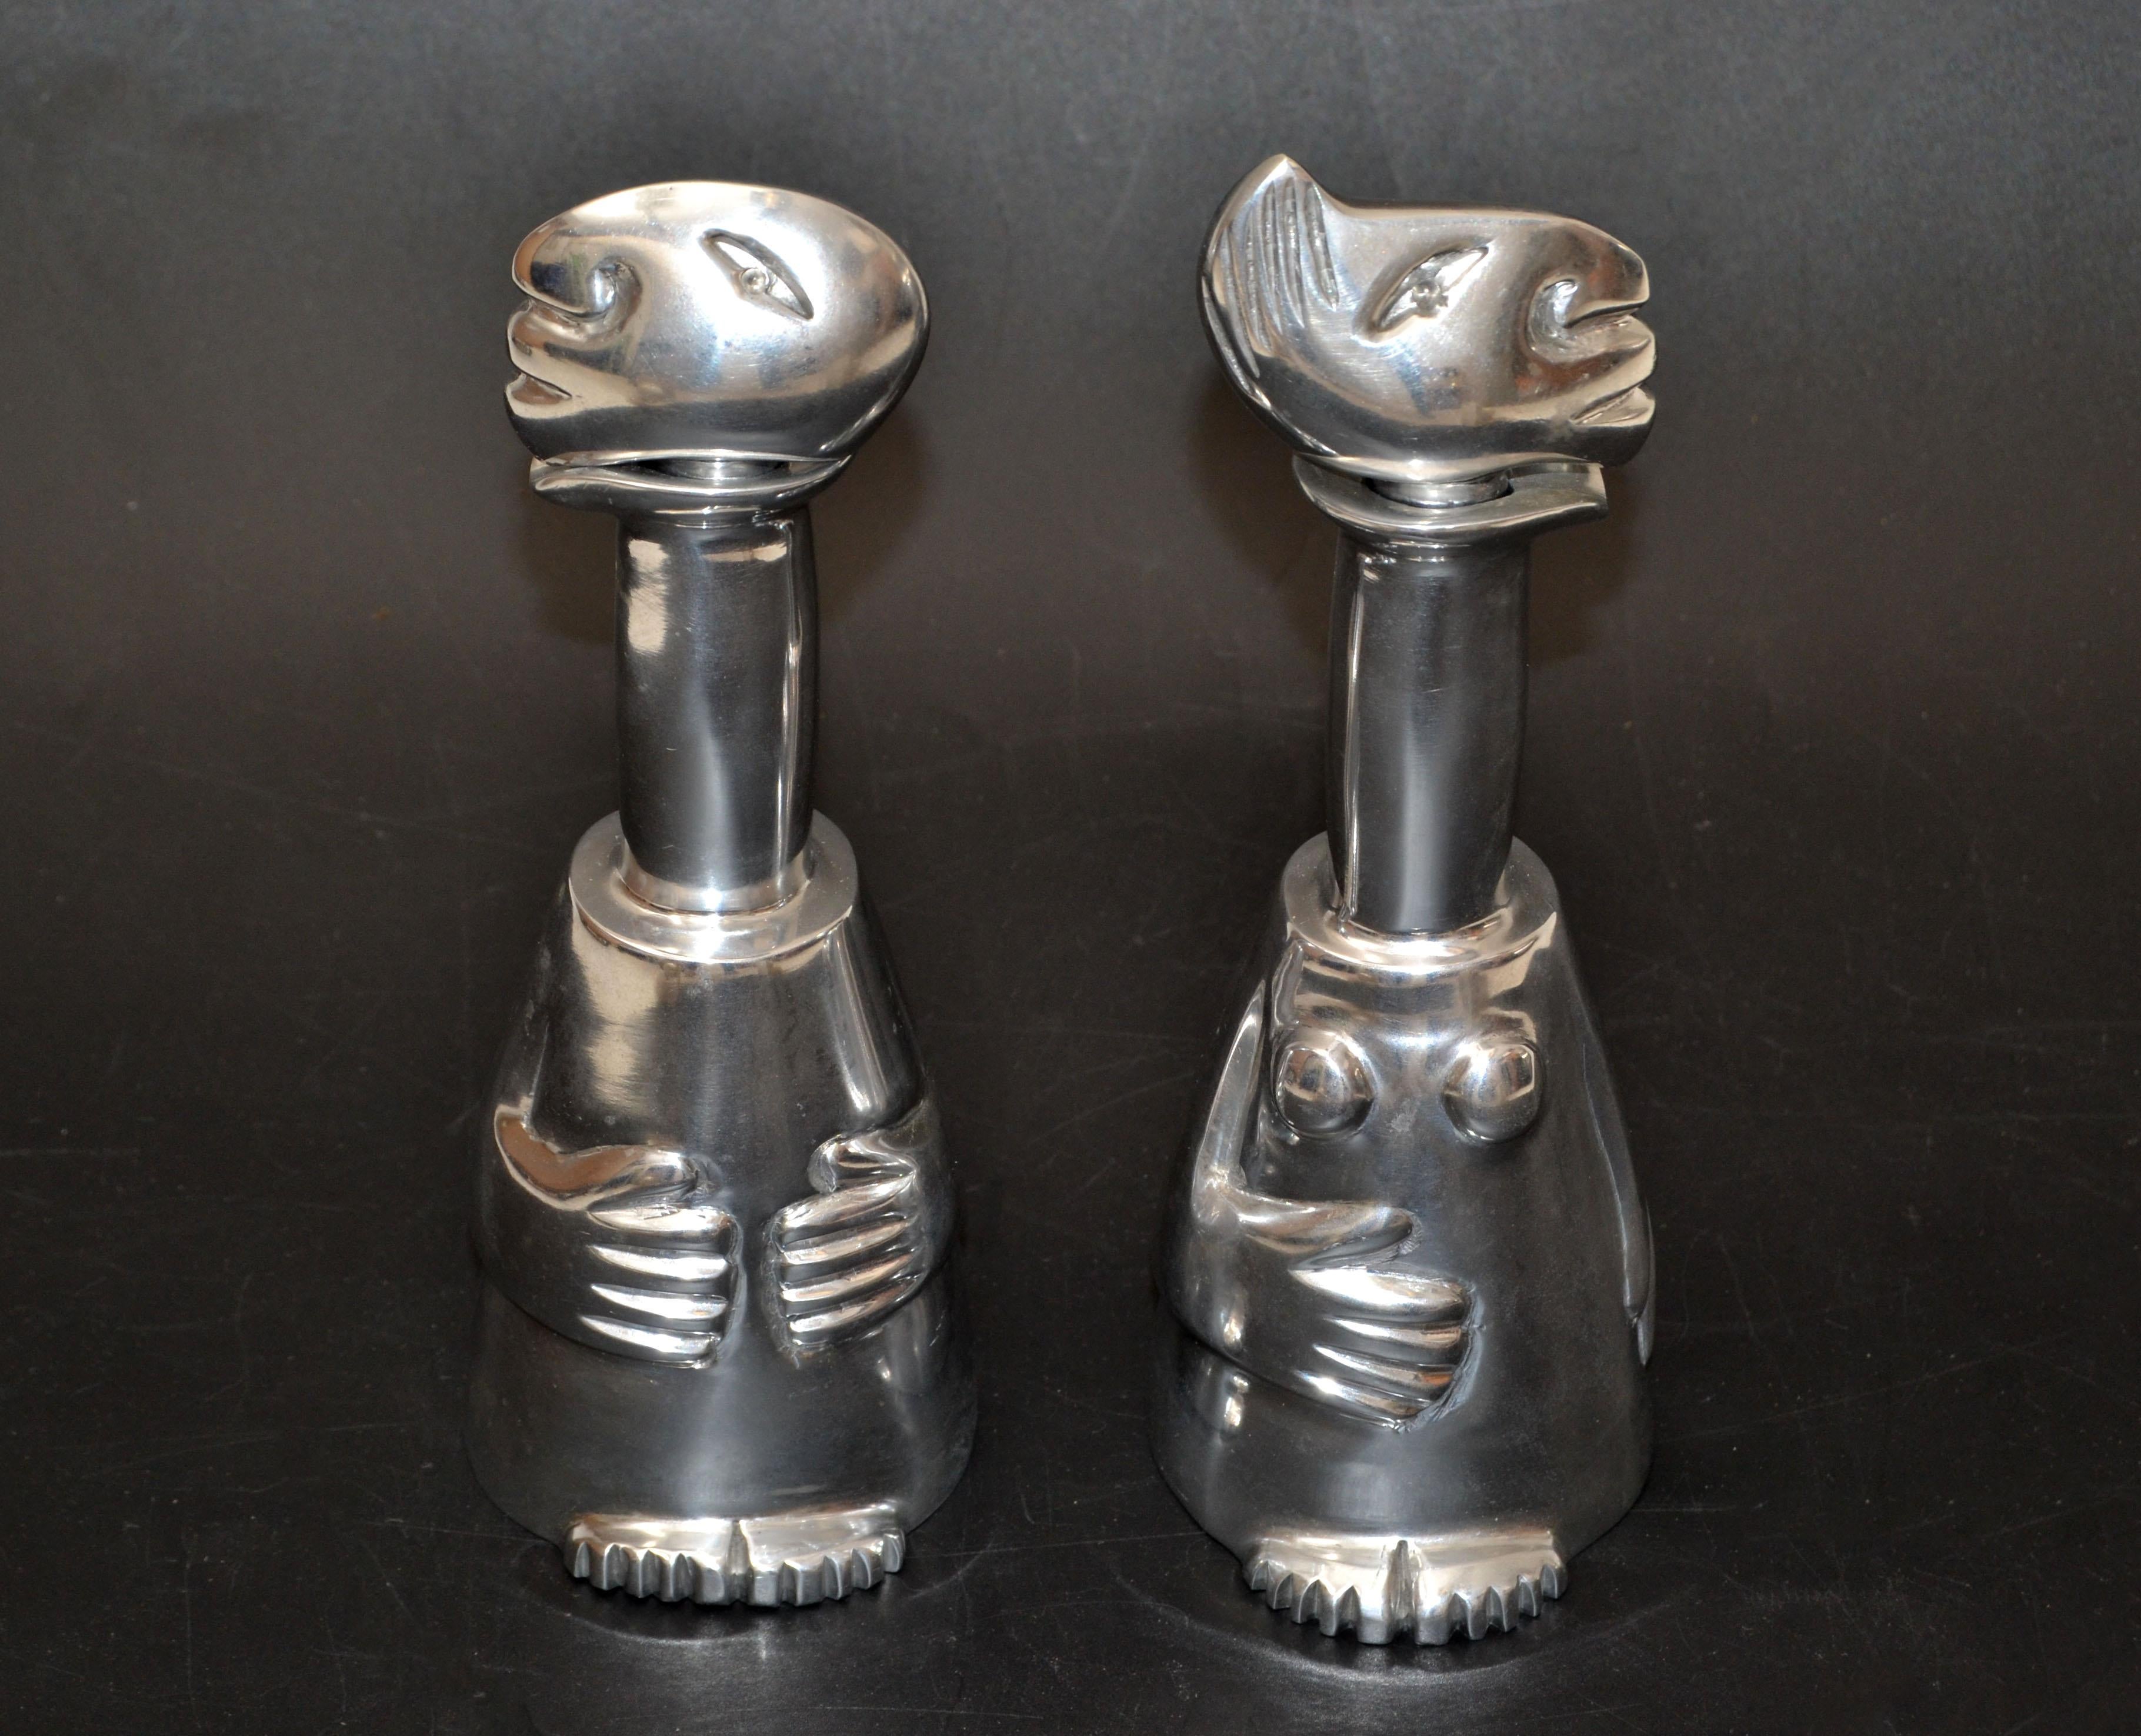 Carrol Boyes South African artist aluminum abstract man & woman Vessel, Bottle or Barware with Stopper.
Whimsical design that functions with a unique look! 
Marked at the Base.